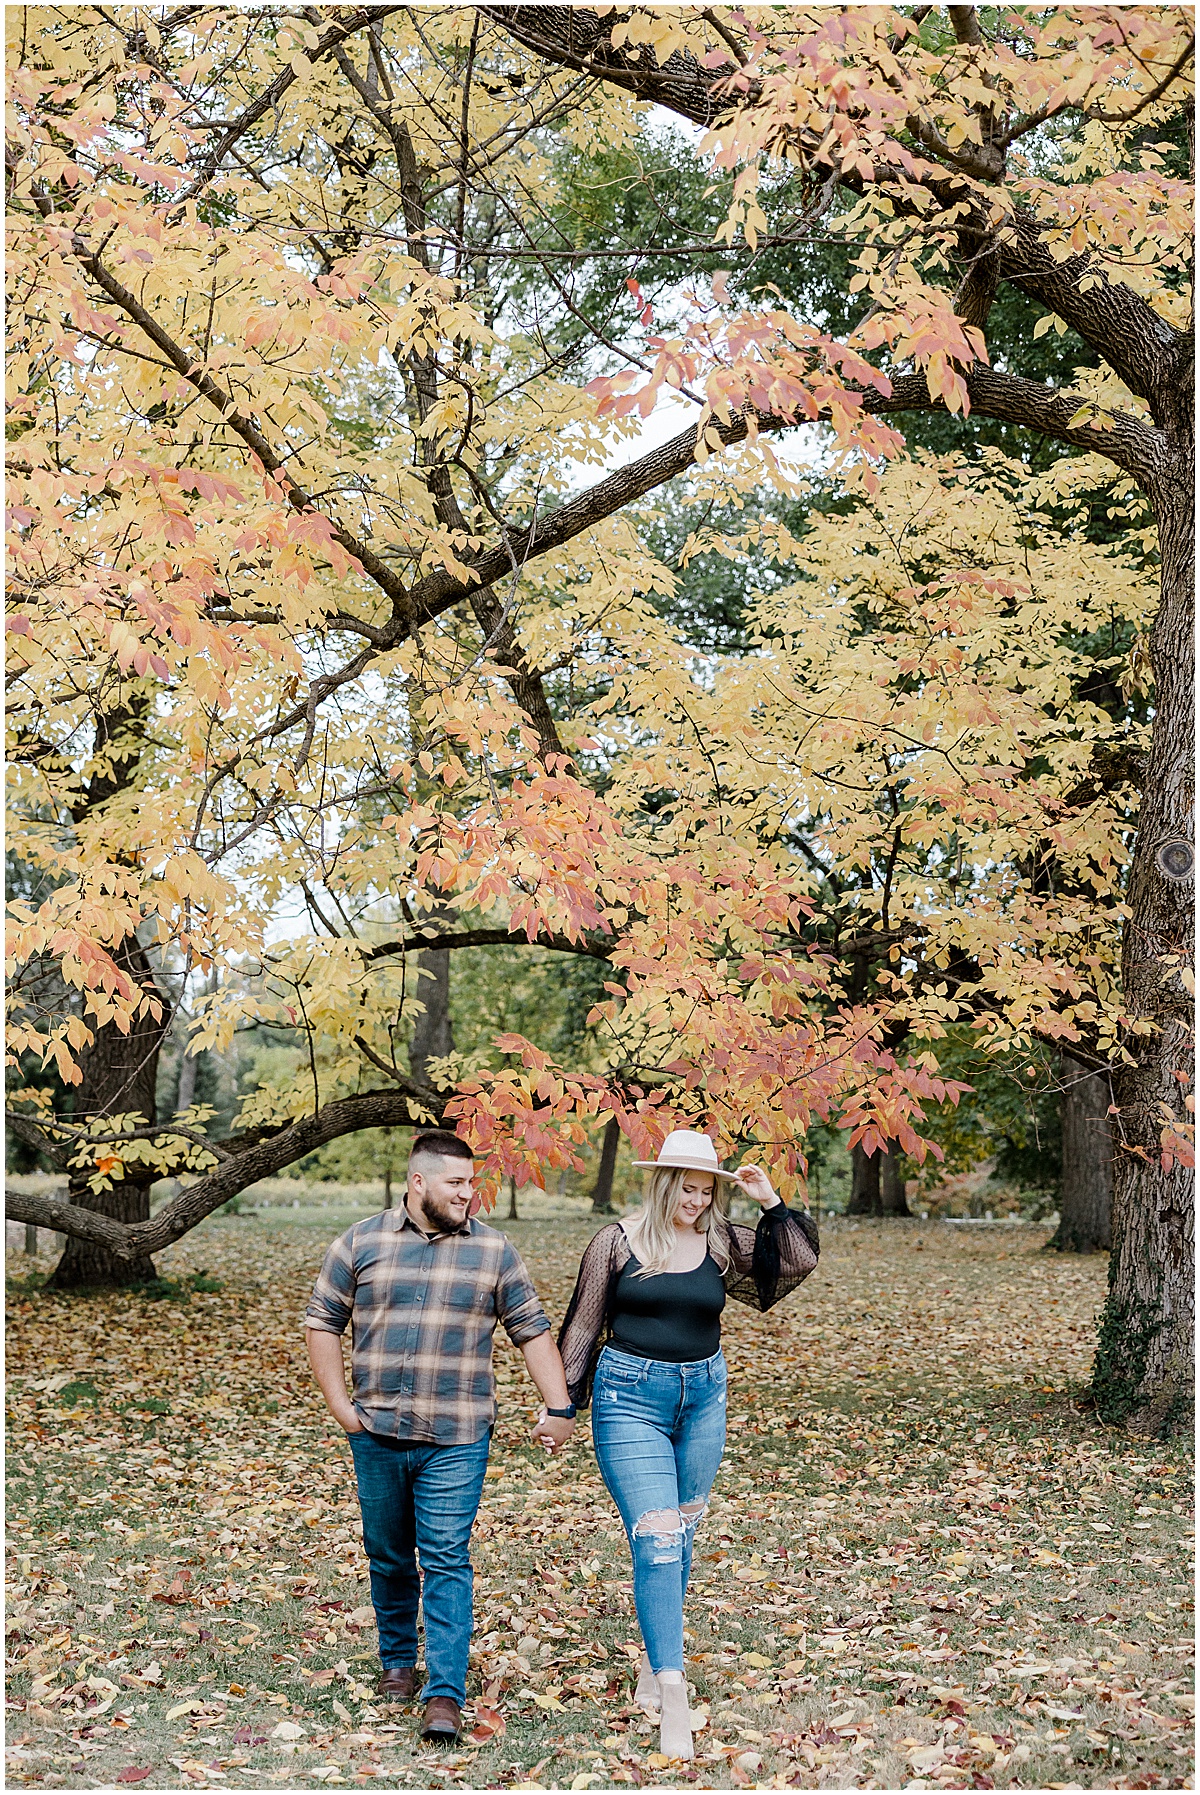 A Holliday Park Engagement Session in Indianapolis, Indiana in the Fall photographed by Kaitlin Mendoza Photography.